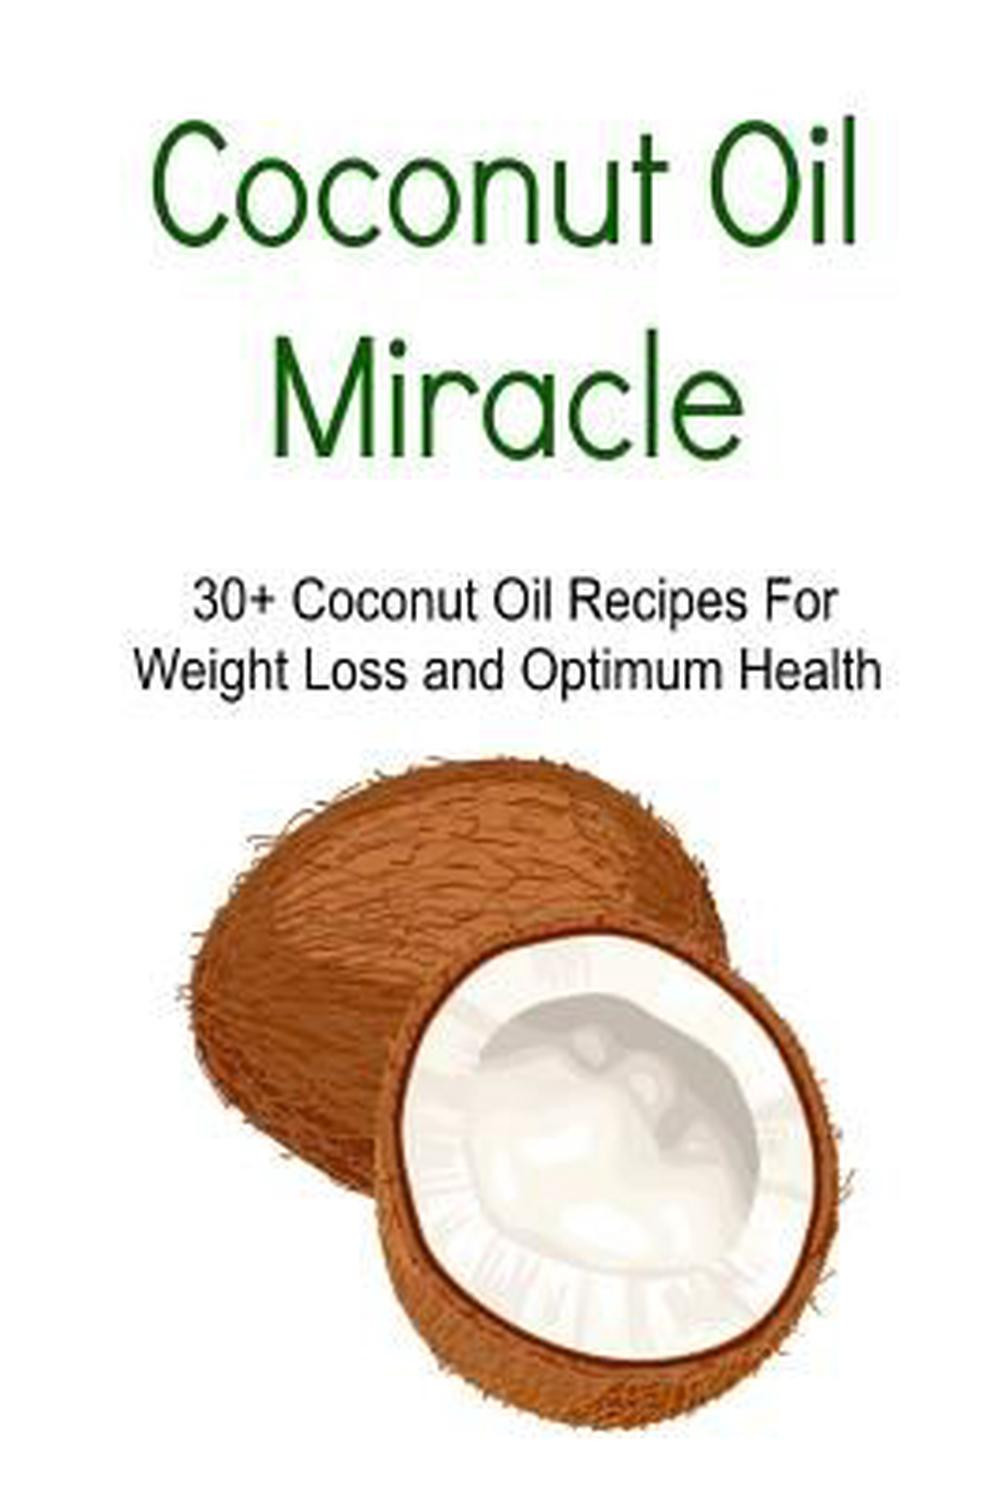 Coconut Oil Recipes For Weight Loss
 Coconut Oil Miracle 30 Coconut Oil Recipes for Weight